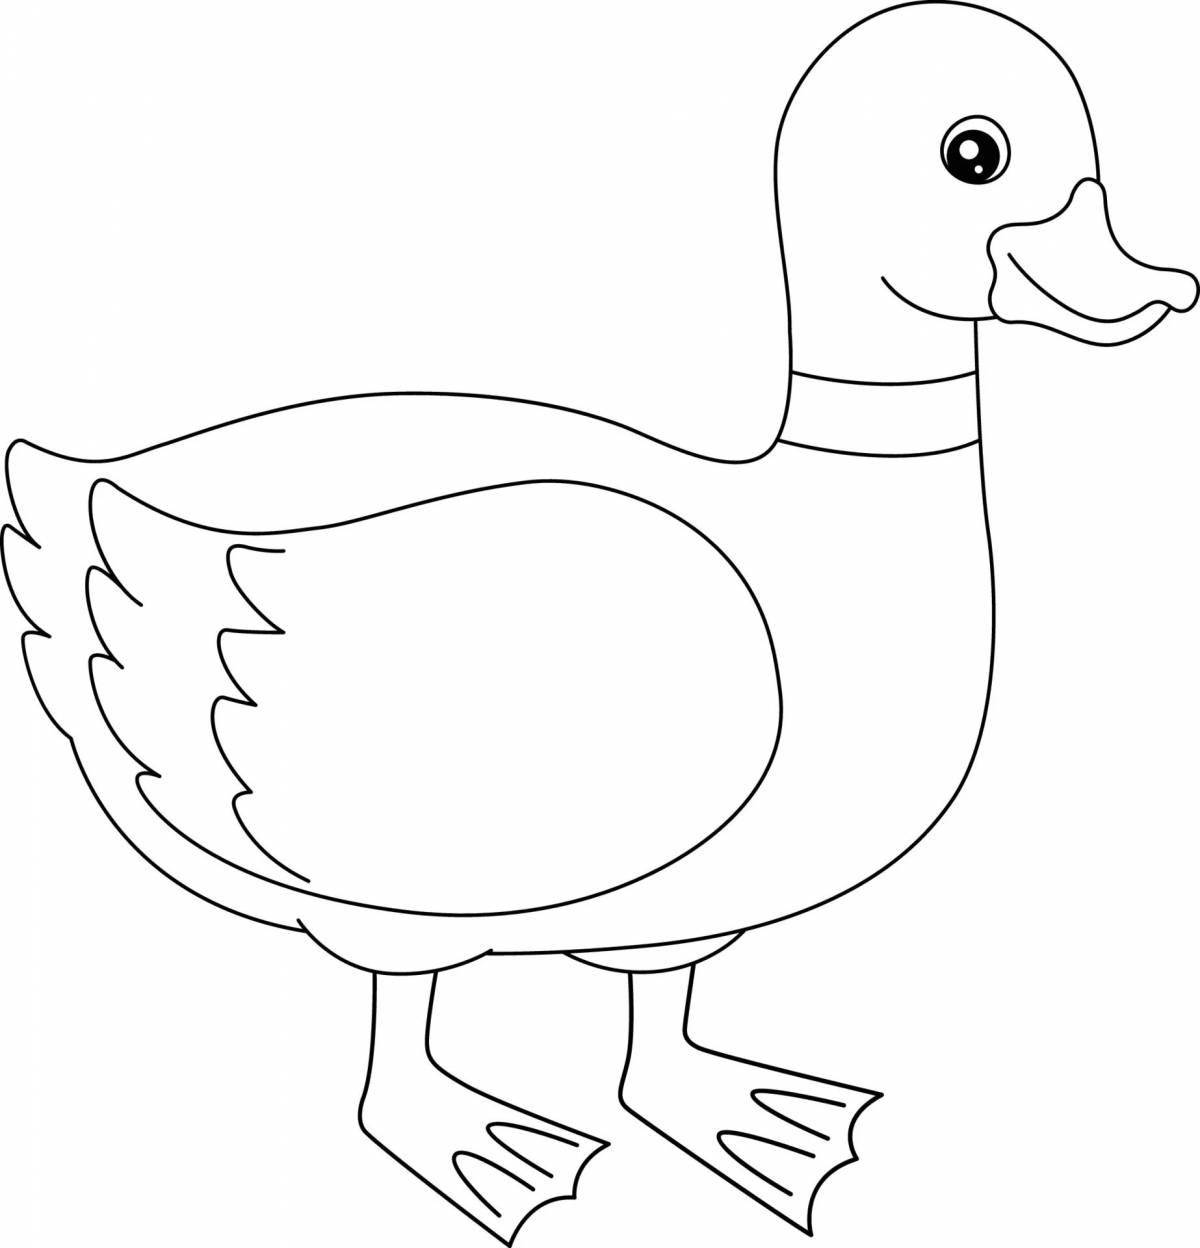 Duck for children 3 4 years old #4